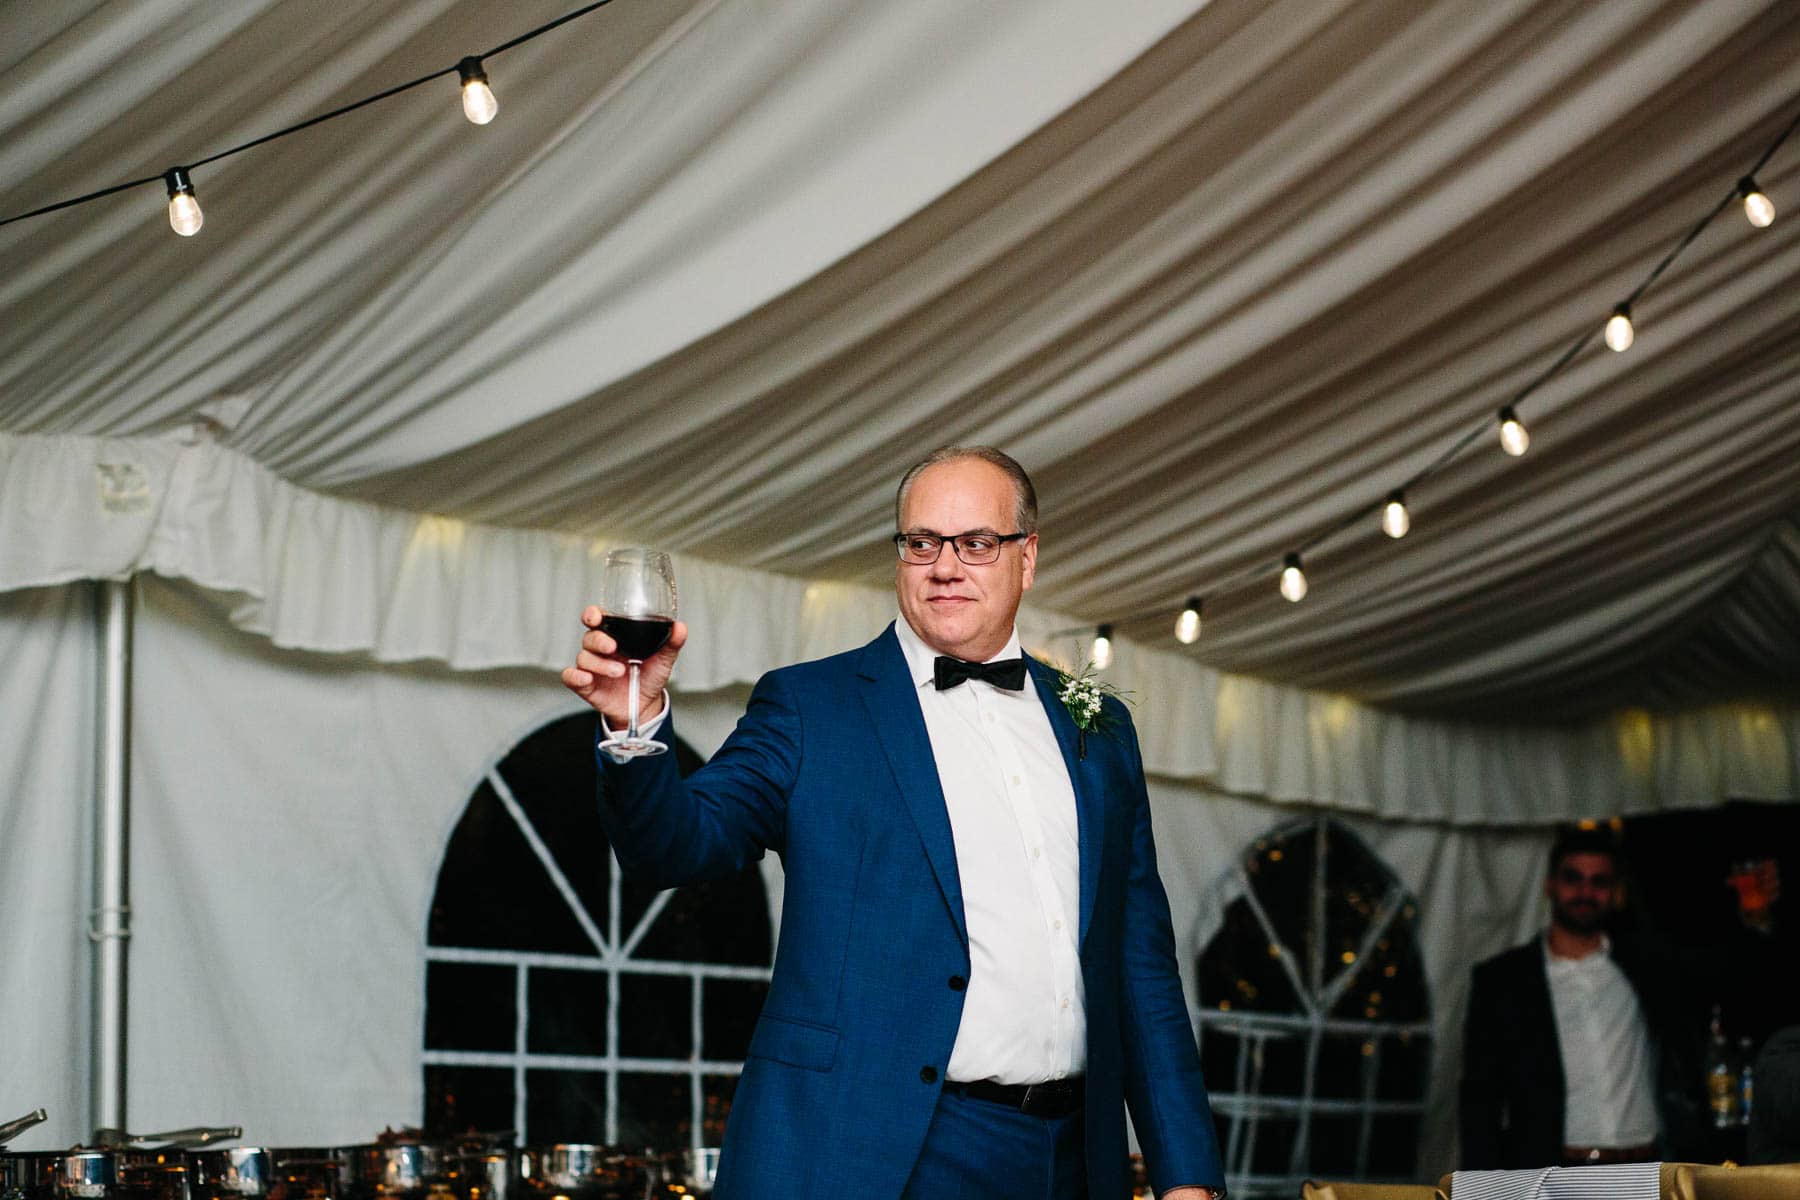 father offers a toast | Kelly Benvenuto Photography